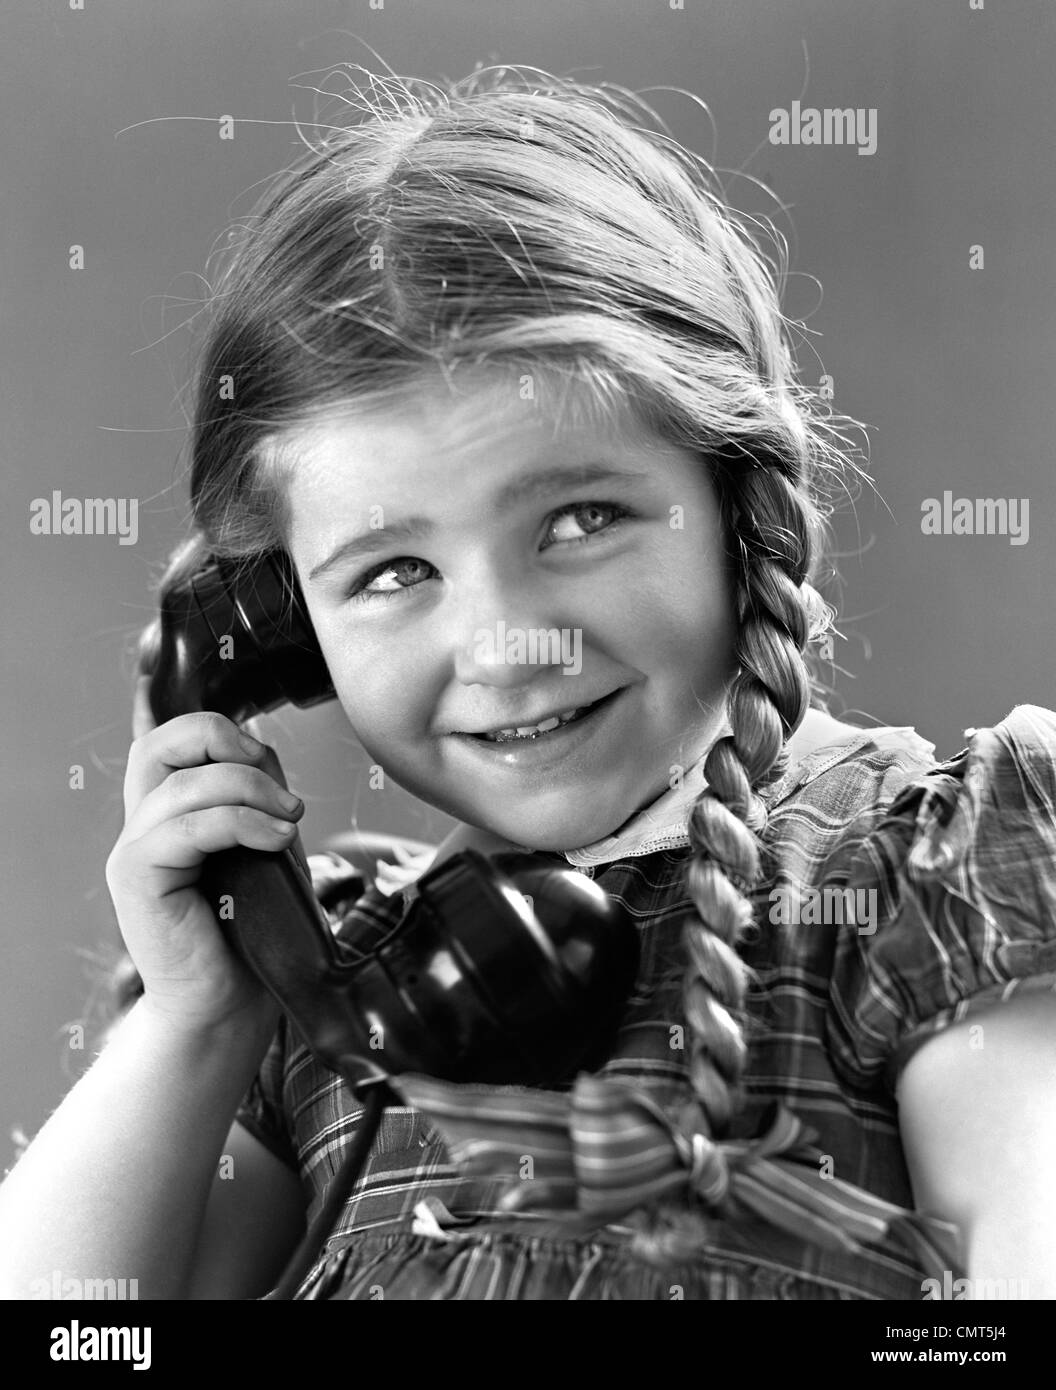 1930s 1940s PORTRAIT OF SMILING LITTLE GIRL WITH LONG PIGTAILS TALKING ON TELEPHONE Stock Photo